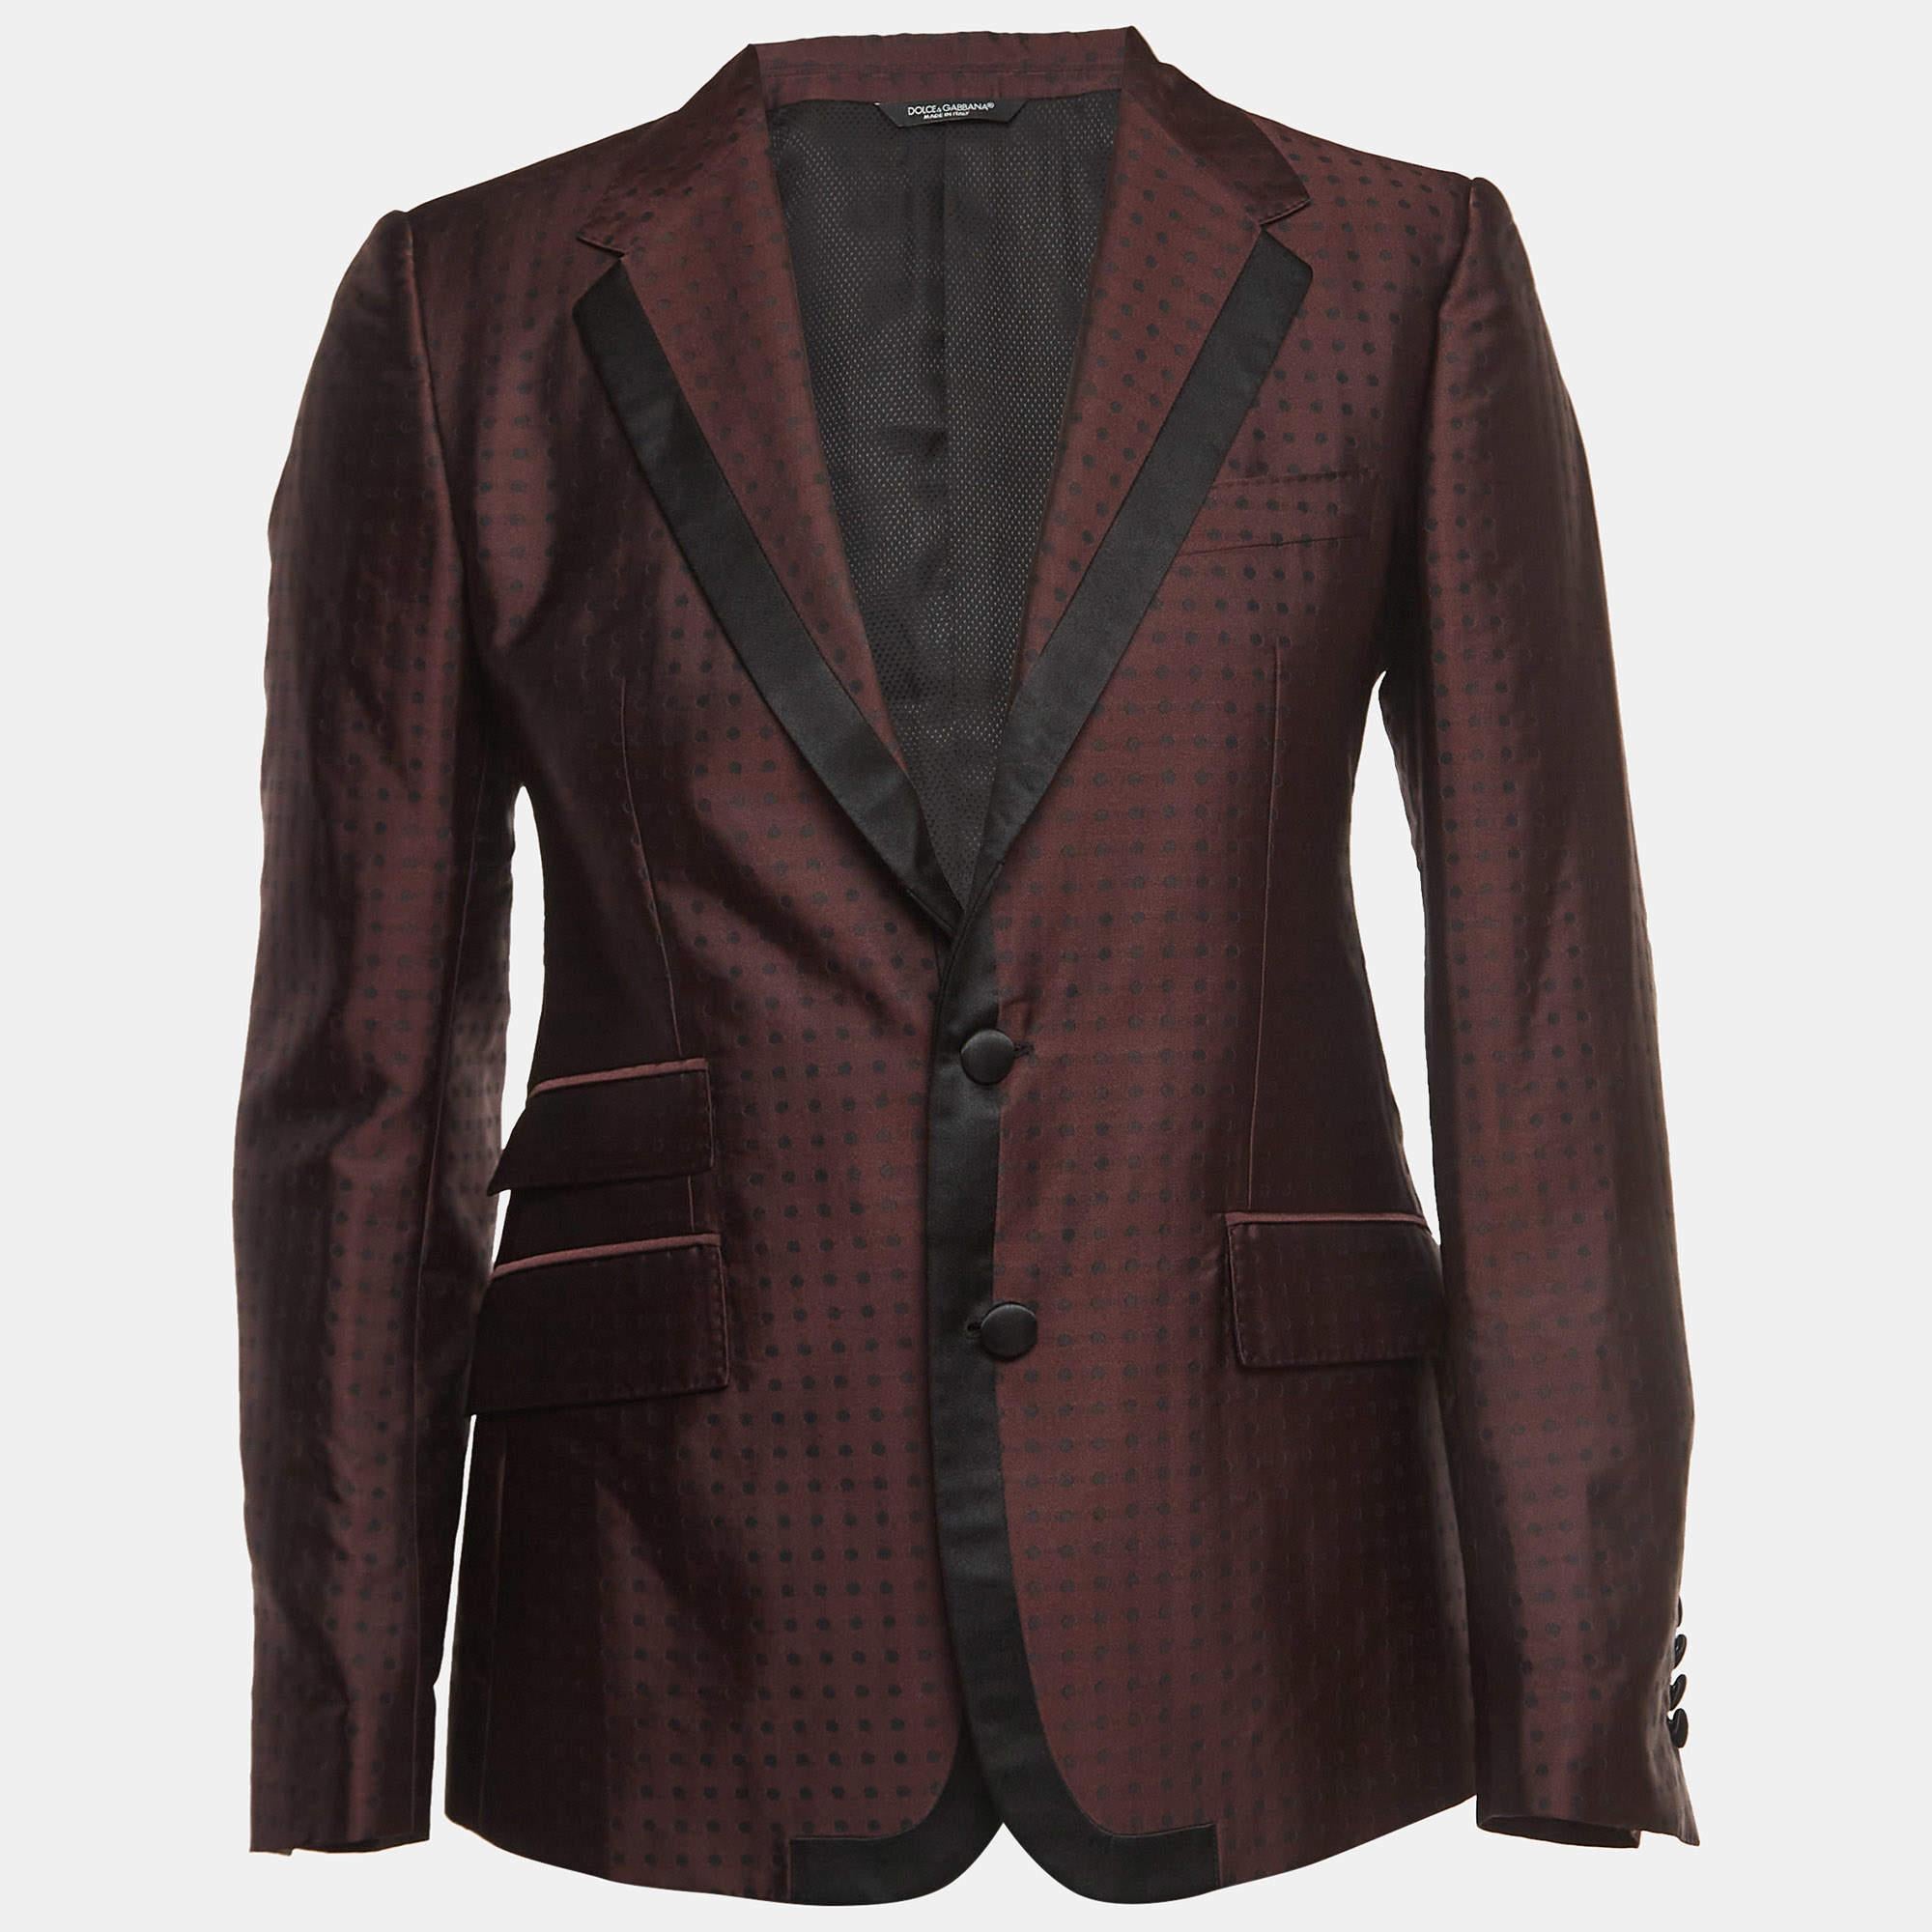 This blazer brings you both class and luxury as you wear it. It is highlighted with long sleeves and classic details, thus granting a polished, formal finish.

